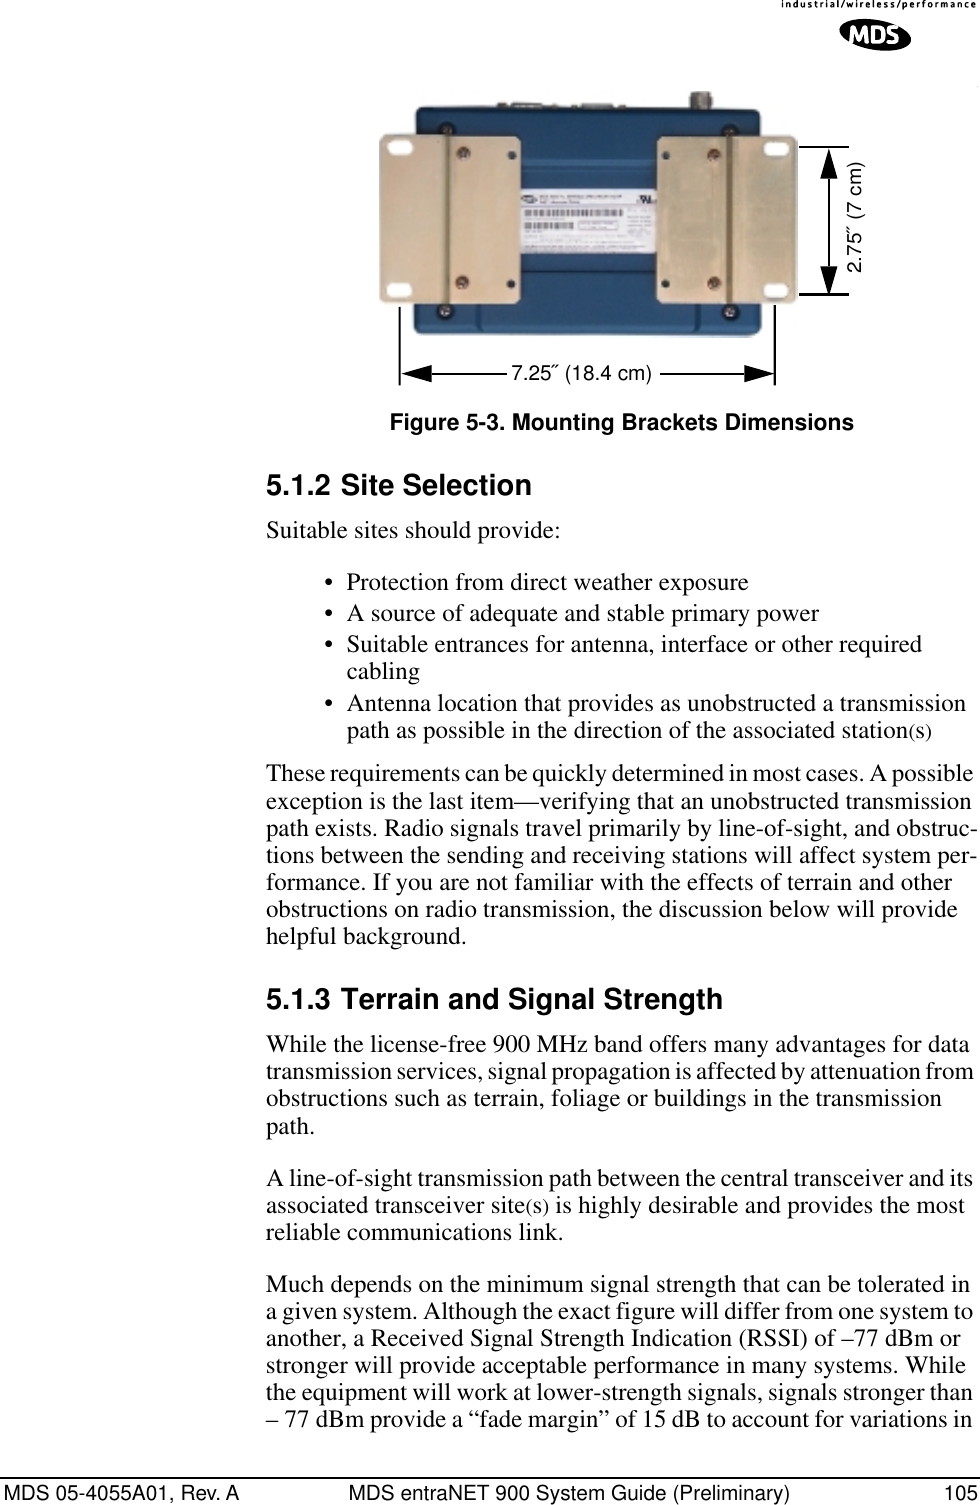 MDS 05-4055A01, Rev. A MDS entraNET 900 System Guide (Preliminary) 105Invisible place holderInvisible place holder.Figure 5-3. Mounting Brackets Dimensions5.1.2 Site SelectionSuitable sites should provide:•Protection from direct weather exposure•A source of adequate and stable primary power•Suitable entrances for antenna, interface or other required cabling•Antenna location that provides as unobstructed a transmission path as possible in the direction of the associated station(s)These requirements can be quickly determined in most cases. A possible exception is the last item—verifying that an unobstructed transmission path exists. Radio signals travel primarily by line-of-sight, and obstruc-tions between the sending and receiving stations will affect system per-formance. If you are not familiar with the effects of terrain and other obstructions on radio transmission, the discussion below will provide helpful background.5.1.3 Terrain and Signal StrengthWhile the license-free 900 MHz band offers many advantages for data transmission services, signal propagation is affected by attenuation from obstructions such as terrain, foliage or buildings in the transmission path.A line-of-sight transmission path between the central transceiver and its associated transceiver site(s) is highly desirable and provides the most reliable communications link. Much depends on the minimum signal strength that can be tolerated in a given system. Although the exact figure will differ from one system to another, a Received Signal Strength Indication (RSSI) of –77 dBm or stronger will provide acceptable performance in many systems. While the equipment will work at lower-strength signals, signals stronger than – 77 dBm provide a “fade margin” of 15 dB to account for variations in 2.75˝ (7 cm)7.25˝ (18.4 cm)